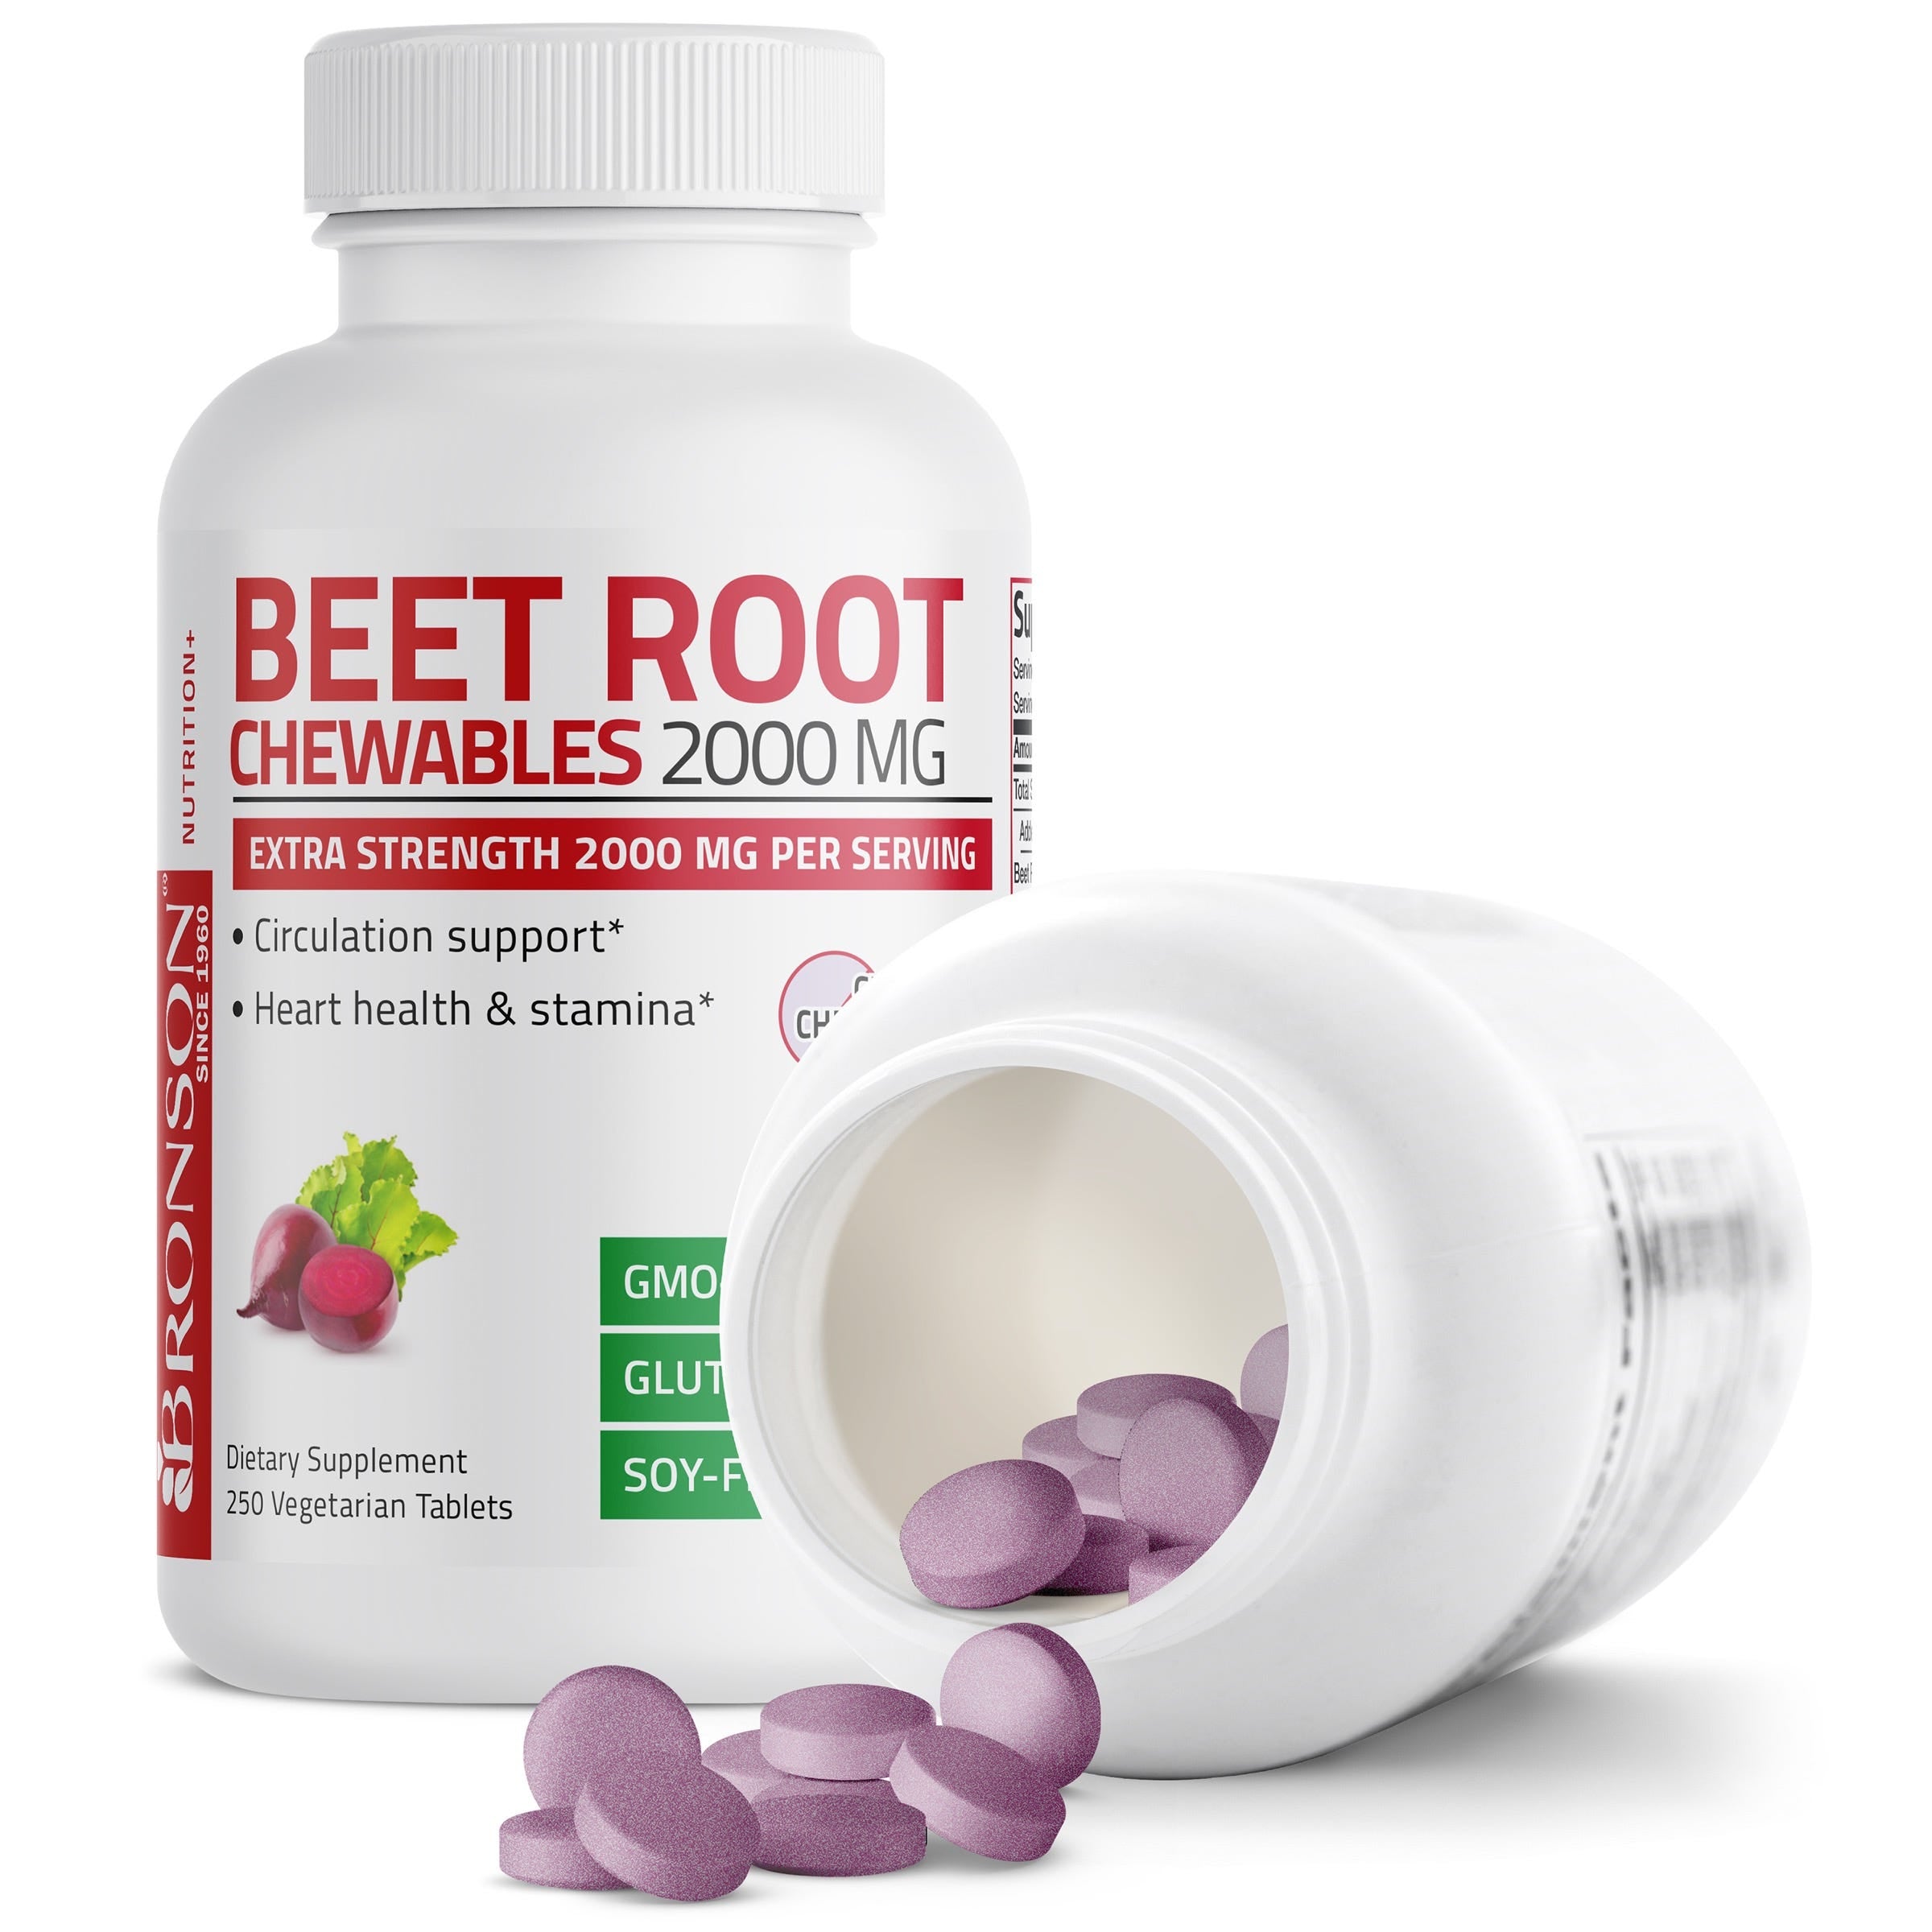 Beet Root Chewables 2000 MG, 250 Grape Flavored Tablets view 4 of 6